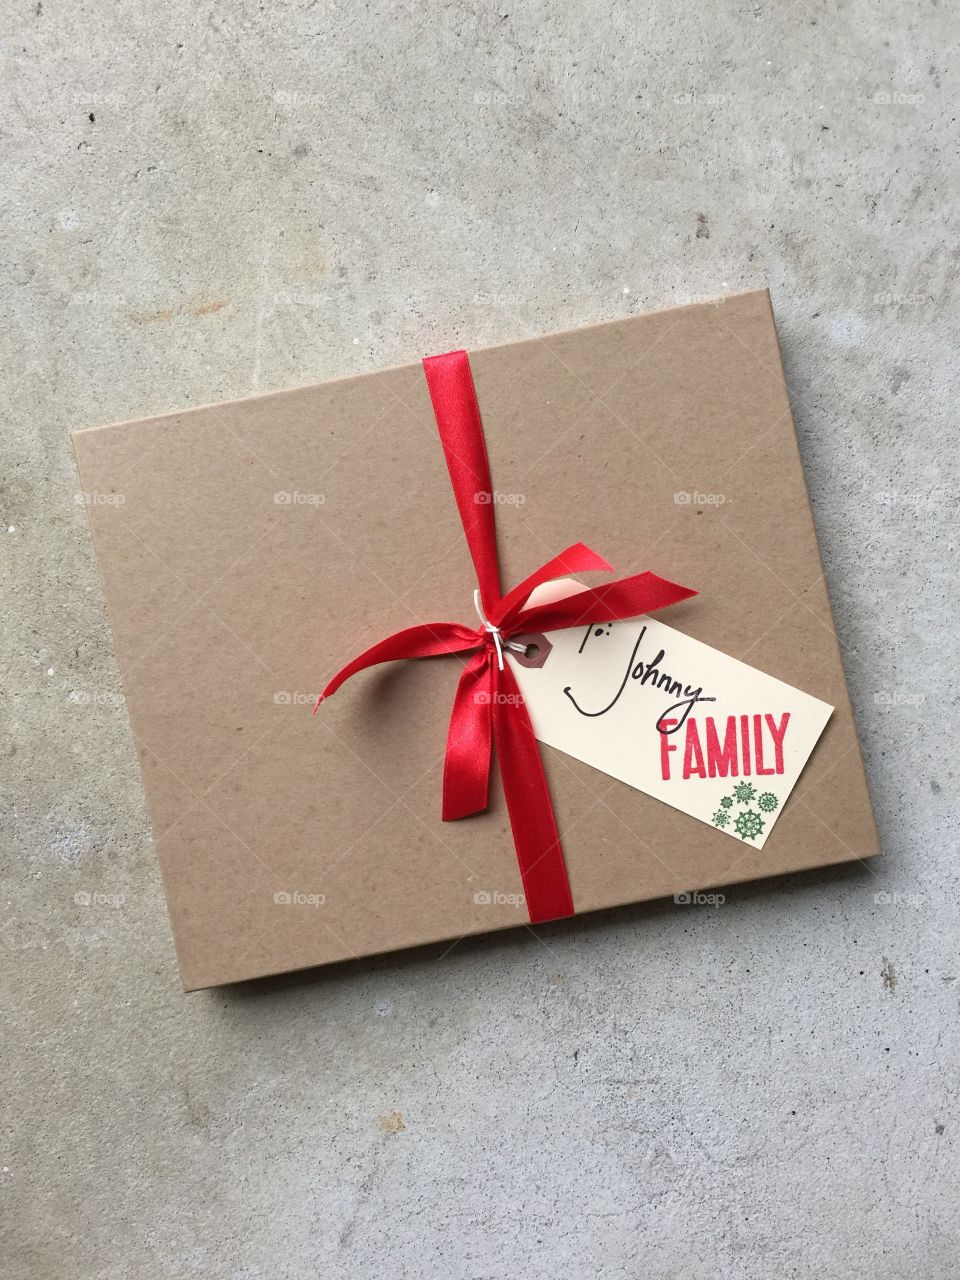 Brown rectangular craft cardboard gift box tied with single red festive ribbon and gift tag with handwriting family 